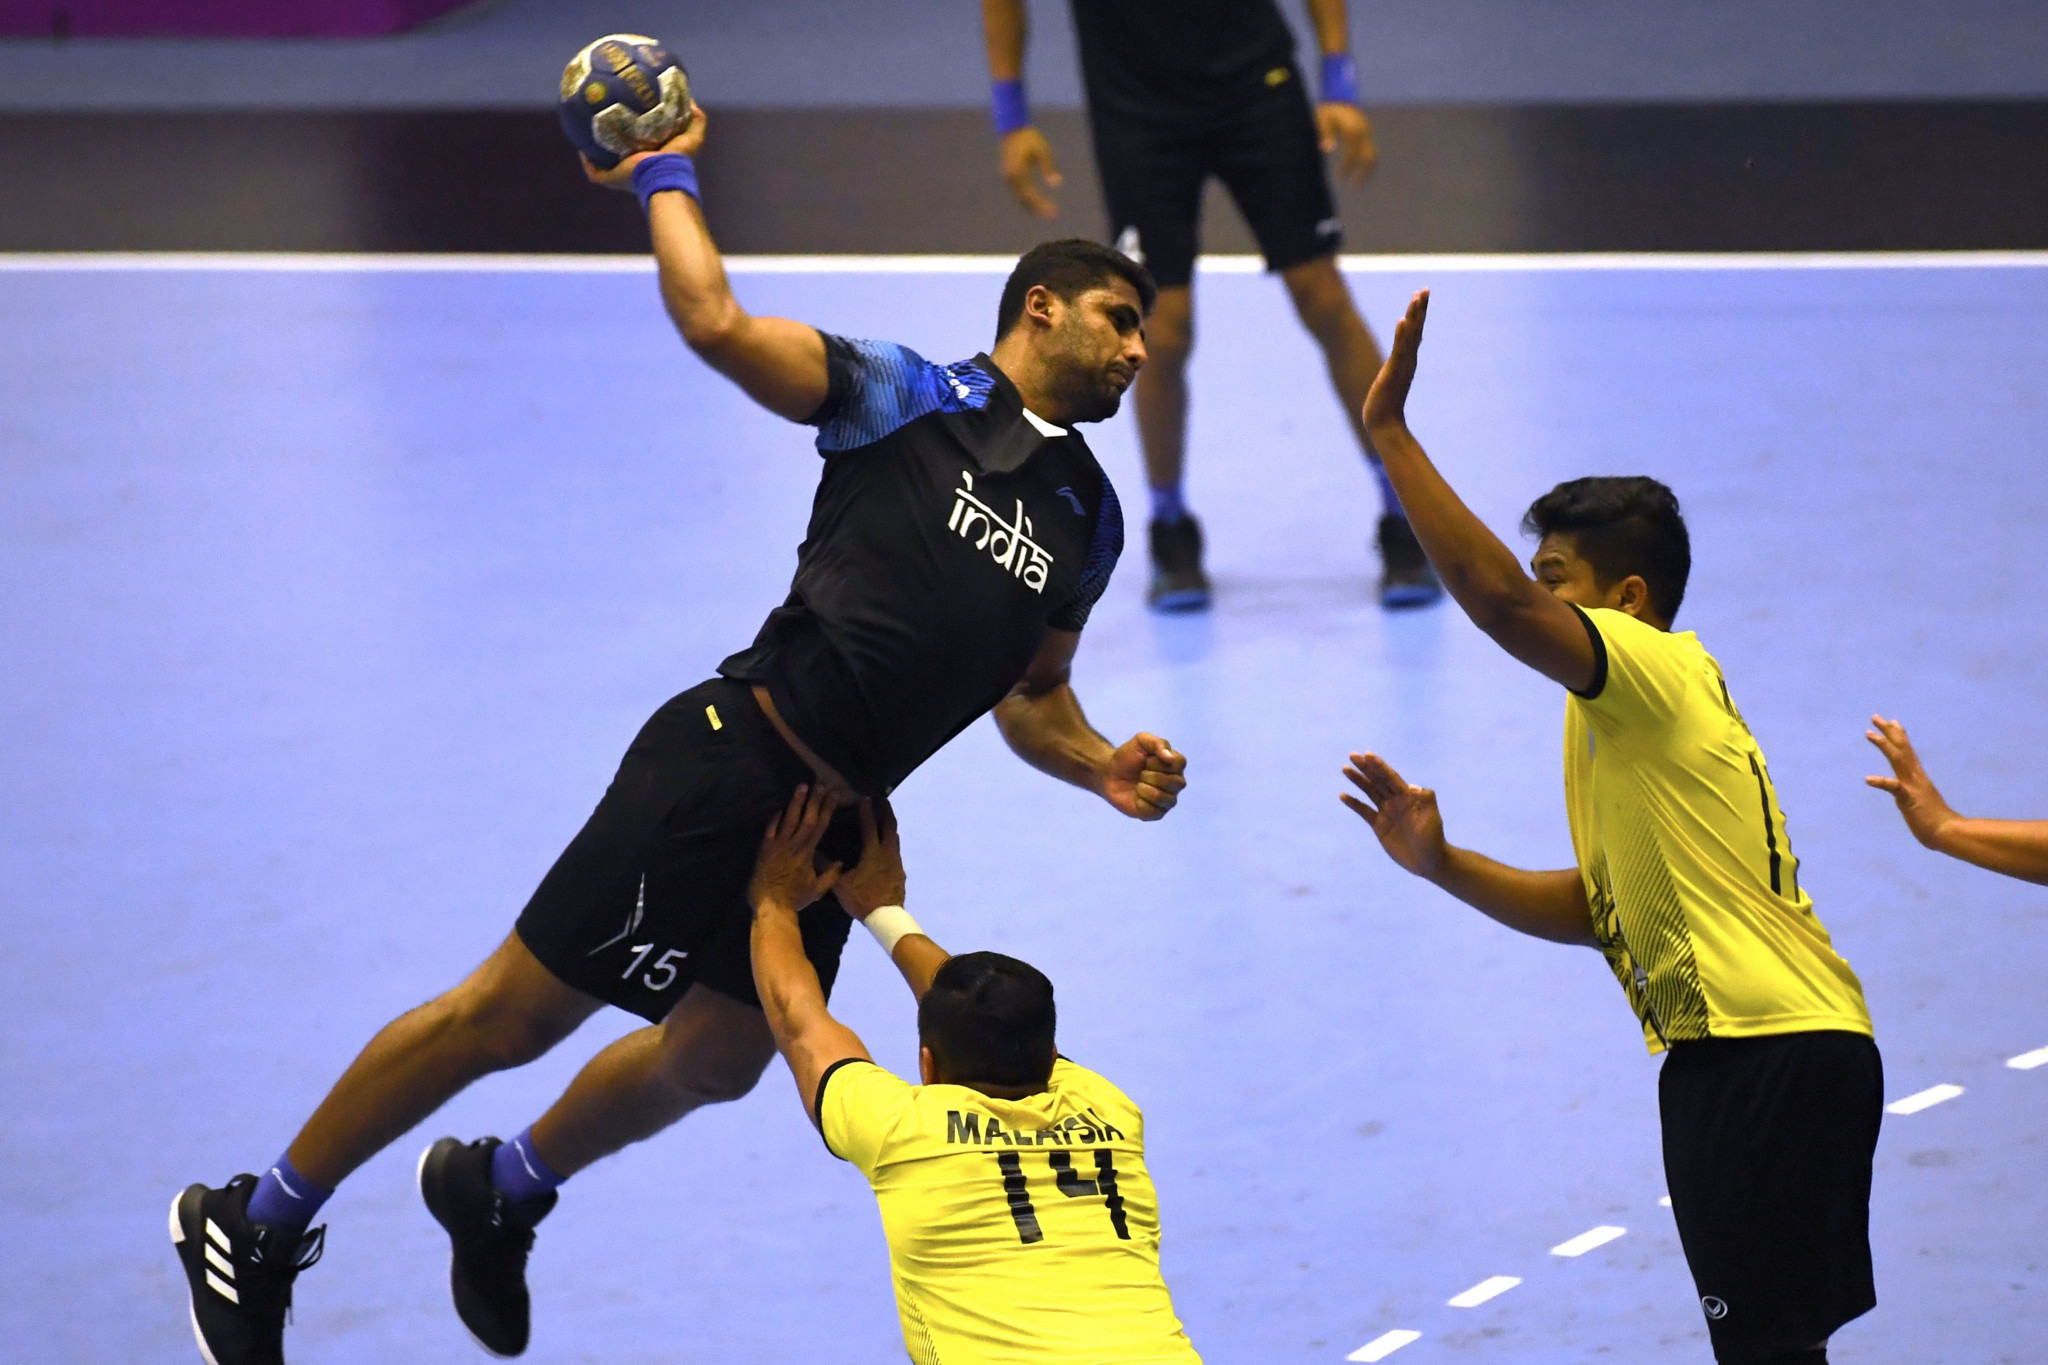 The Premier Handball Premier is expected to boost participation and popularity of the sport in India ©Getty Images